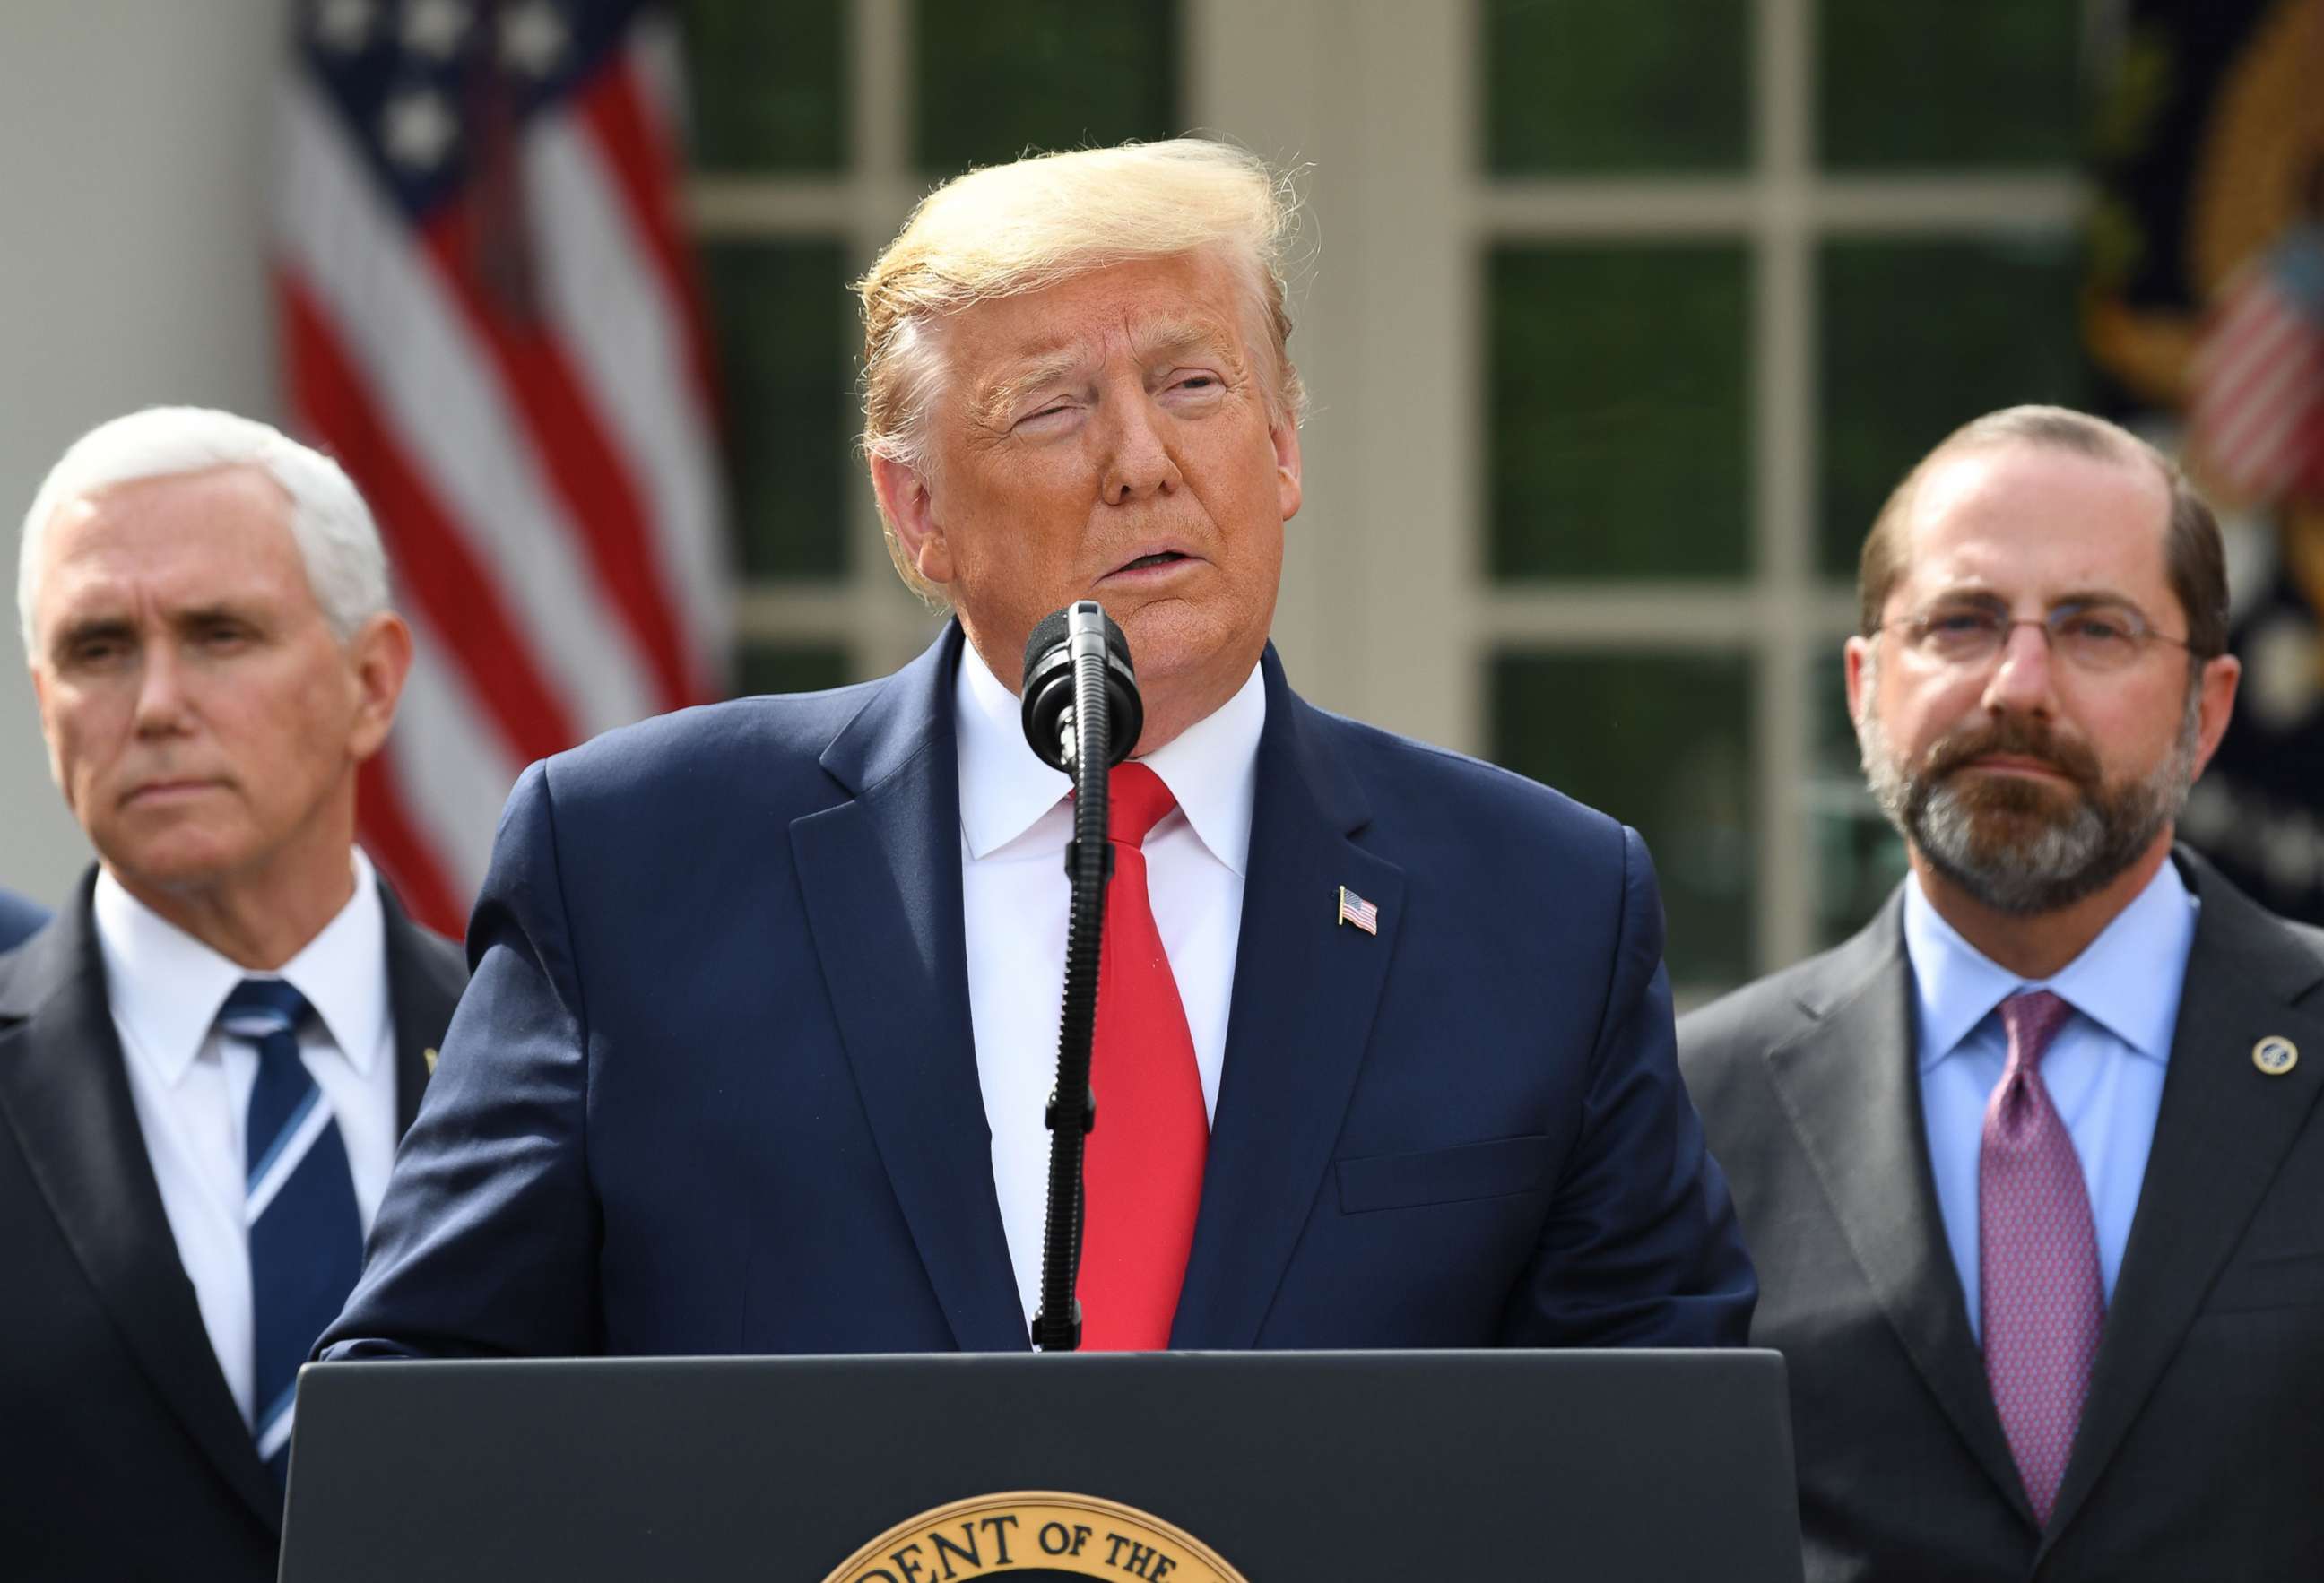 PHOTO: Surrounded by members of the White House Coronavirus Task Force, President Donald Trump speaks at a press conference on COVID-19, known as the coronavirus, in the Rose Garden of the White House in Washington,  March 13, 2020. 